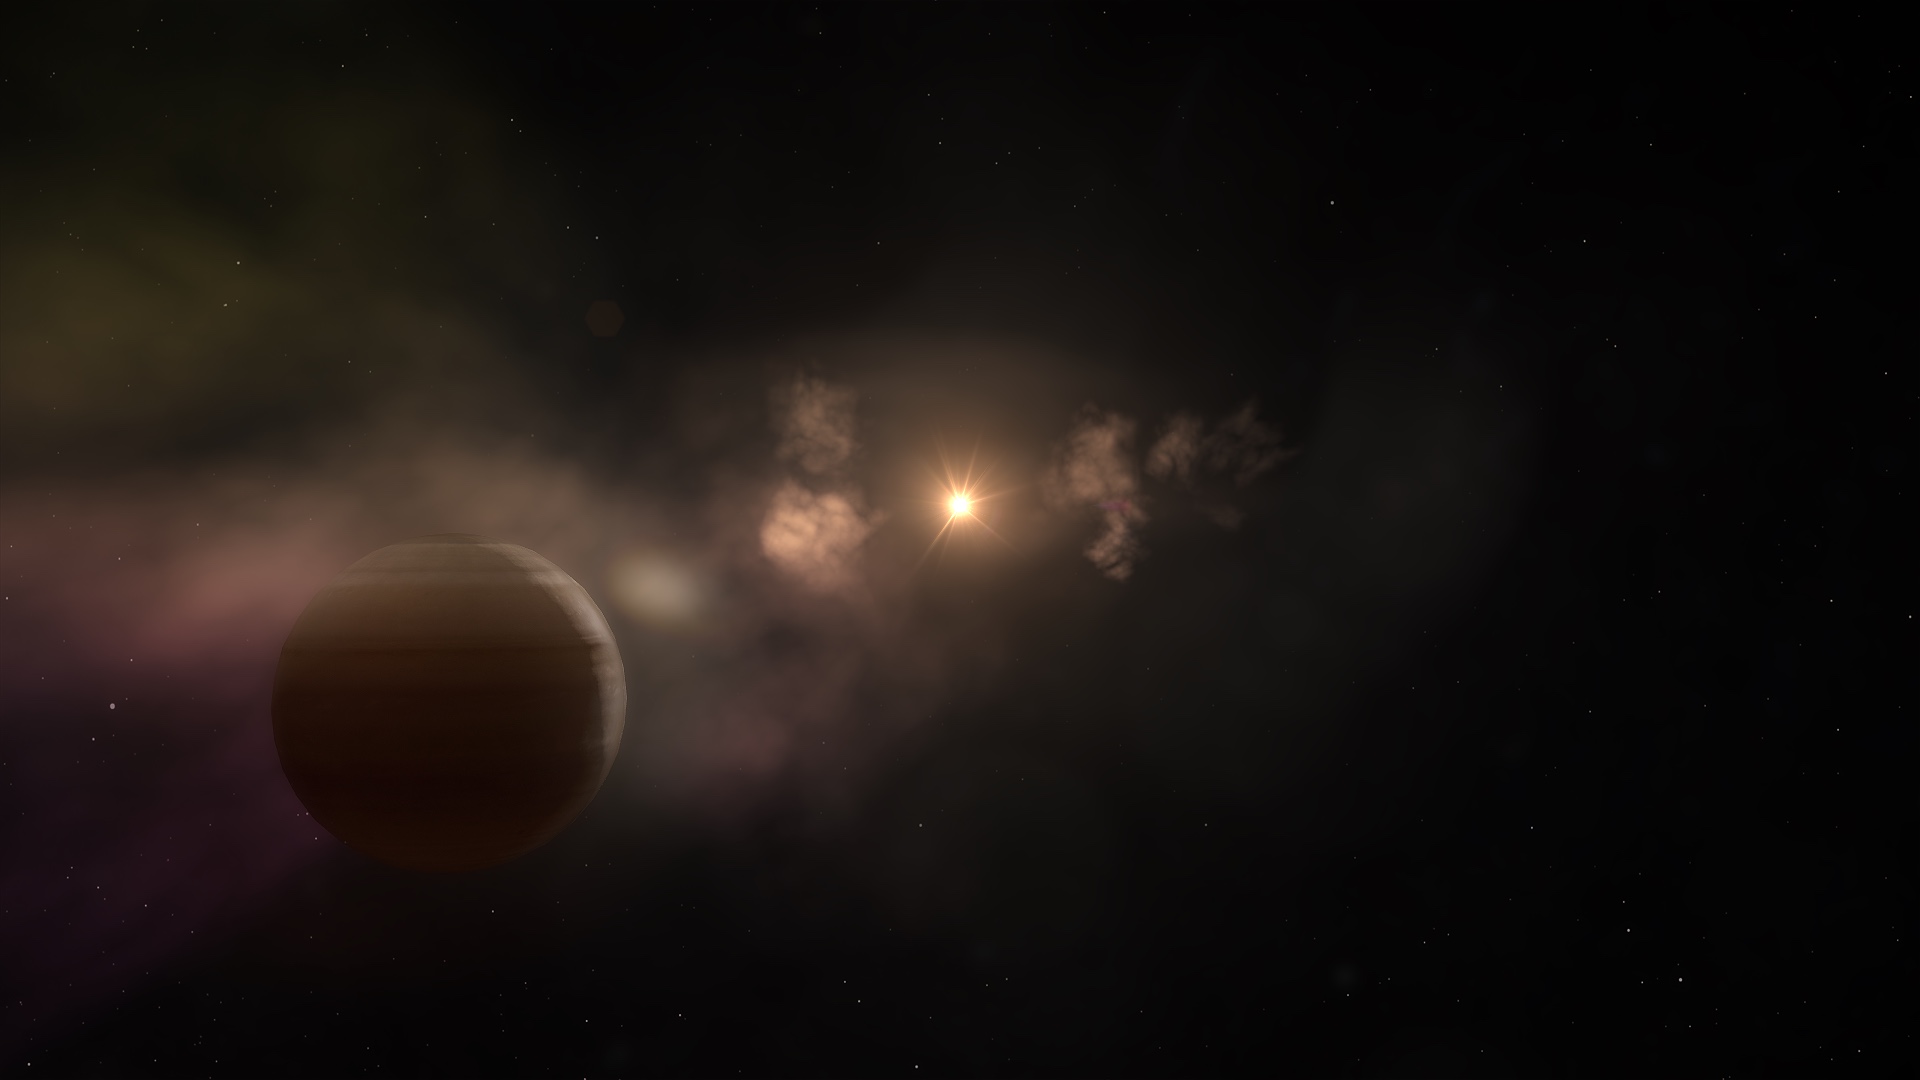 Zoom into RZ Piscium, a star about 550 light-years away that undergoes erratic dips in brightness. This animation illustrates one possible interpretation of the system, with a giant planet near the star slowly dissolving. Gas and dust stream away from the planet, and these clouds occasionally eclipse the star as we view it from Earth.Music: "Frozen Wonder" from Killer Tracks Watch this video on the NASA Goddard YouTube channel.Credit NASA's Goddard Space Flight Center/CI LabComplete transcript available.